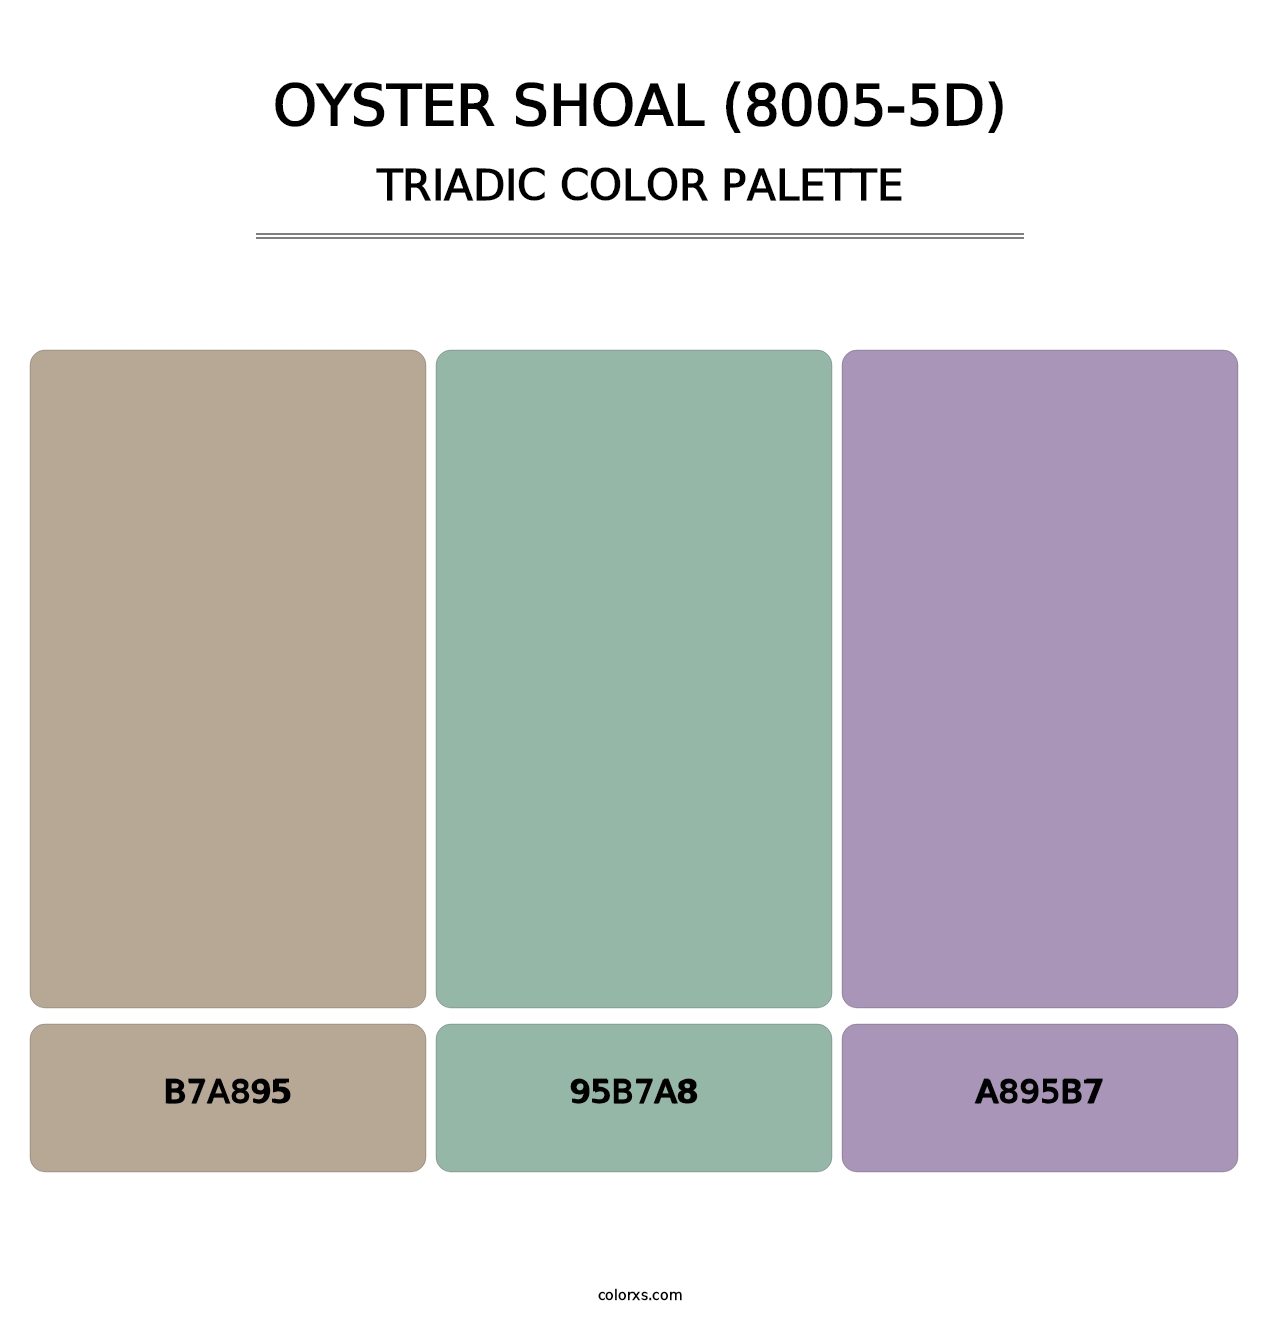 Oyster Shoal (8005-5D) - Triadic Color Palette